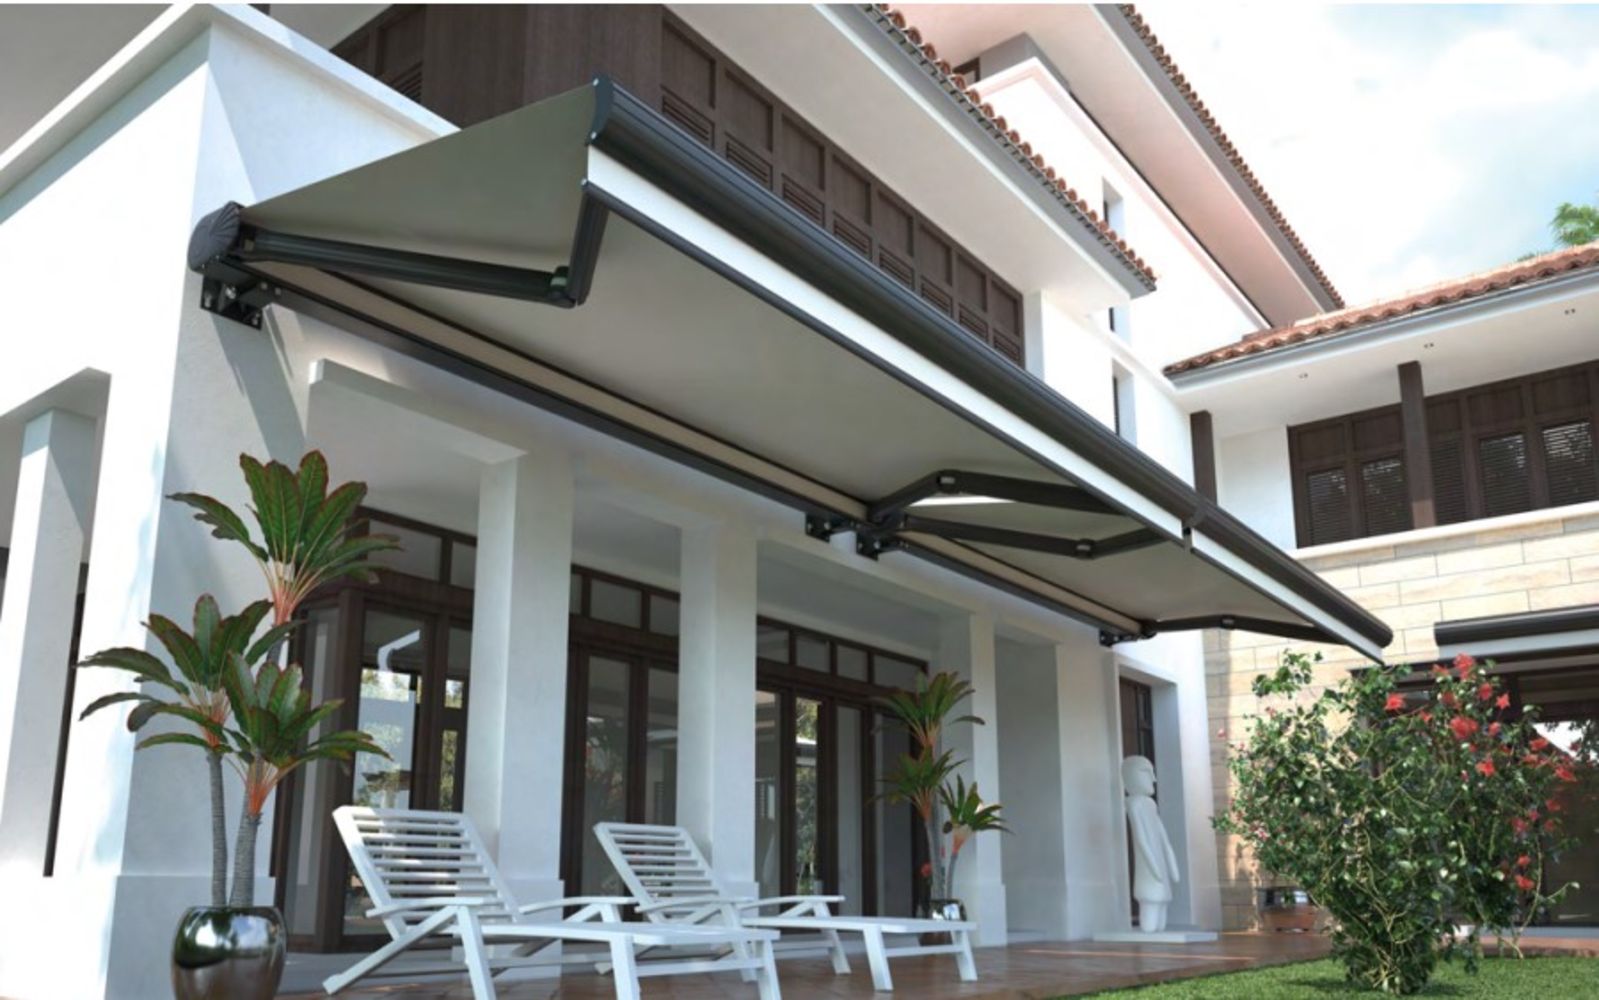 Off site Stock liquidation of High quality New Awnings as sold in Costco